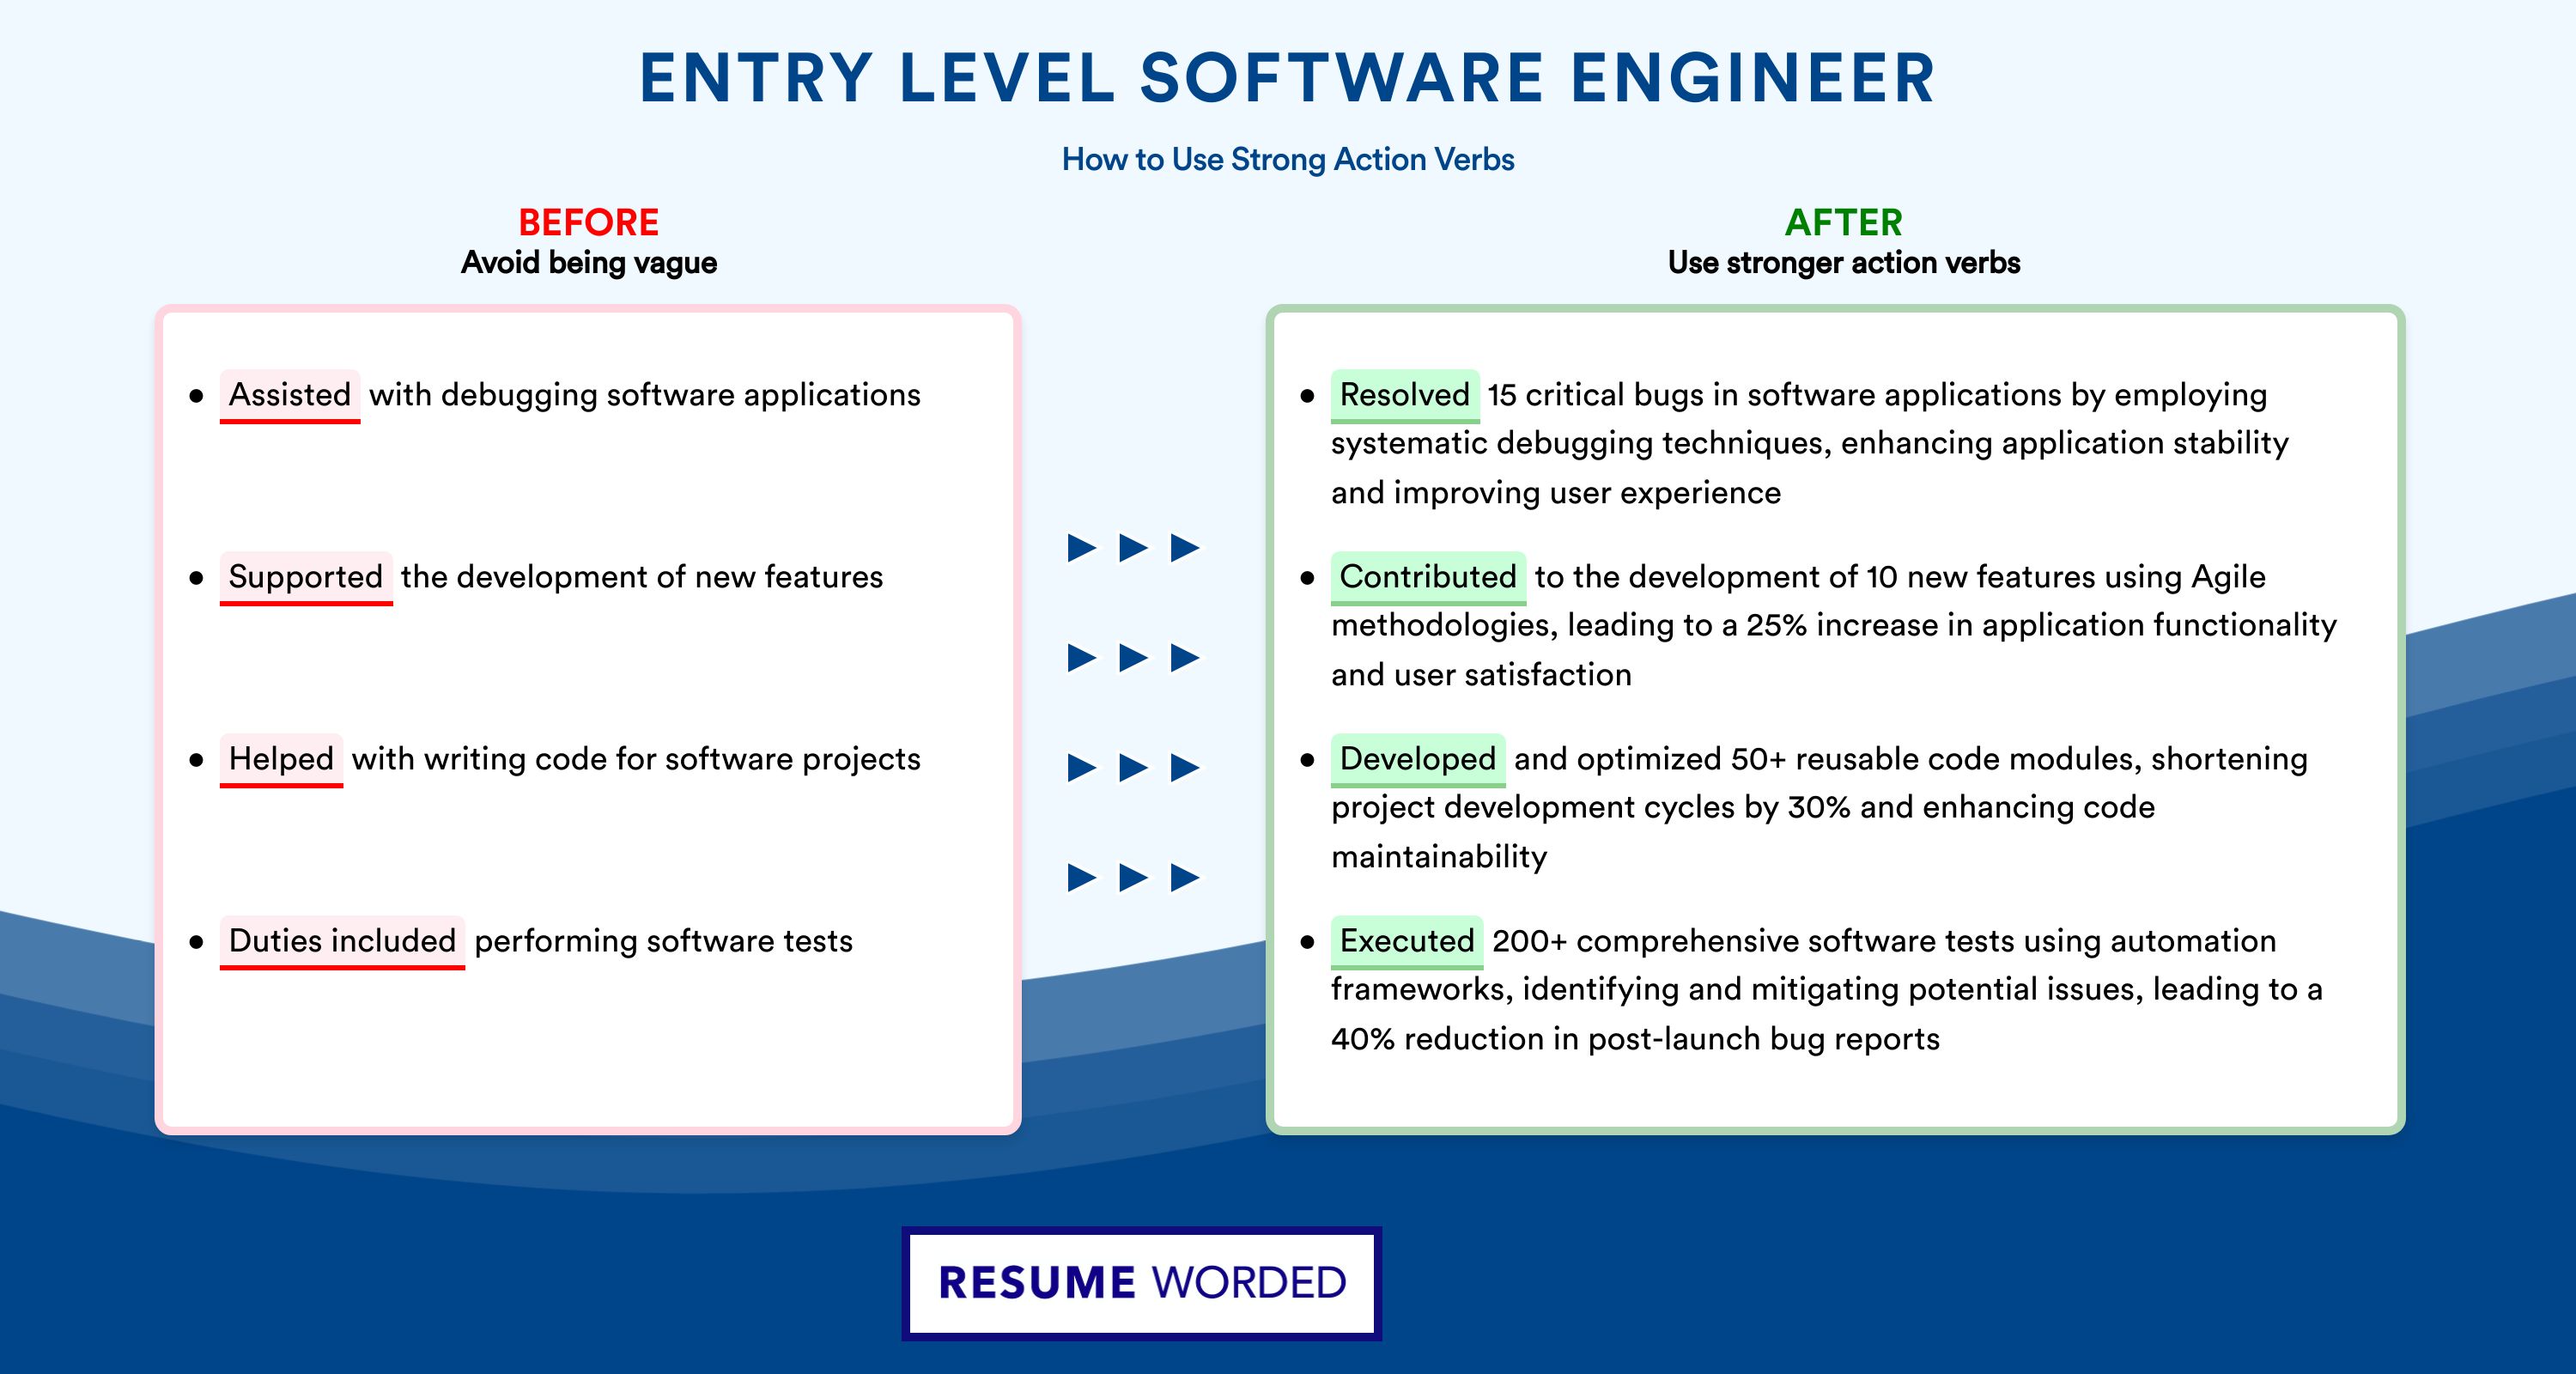 Action Verbs for Entry Level Software Engineer